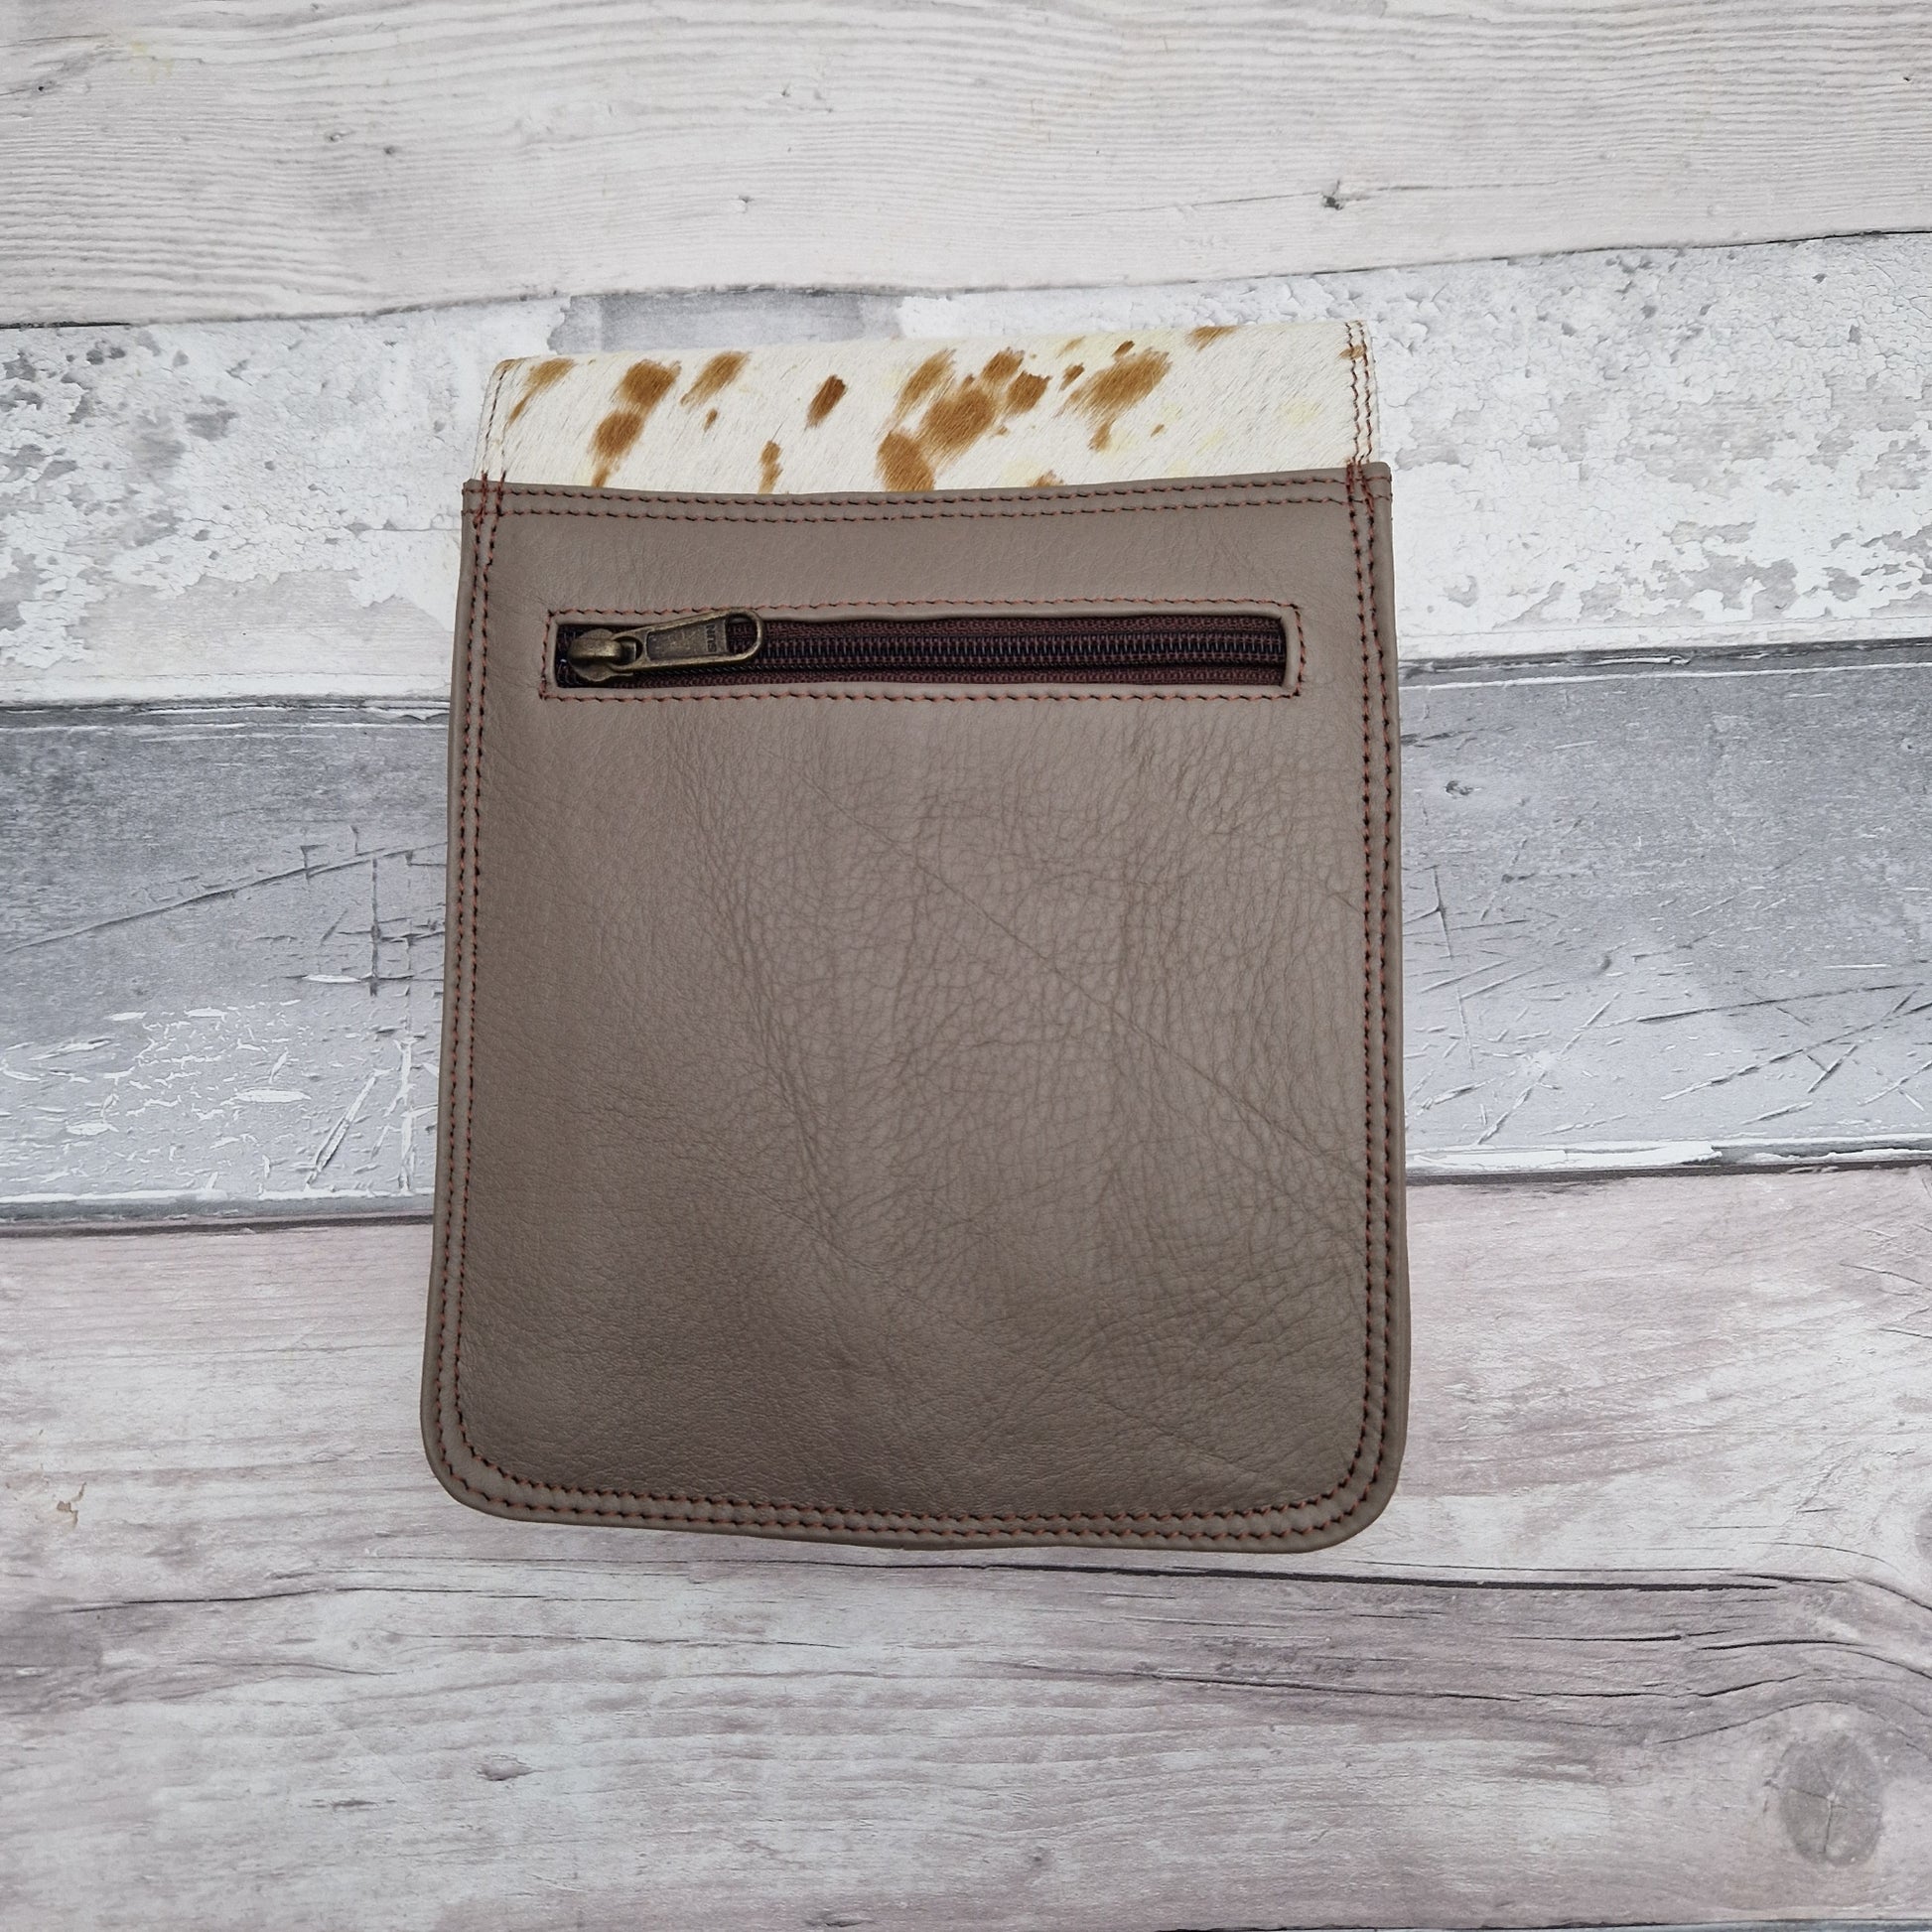 Messenger style bag made from mulit coloured leather off cuts with a textured panel of cow hide.